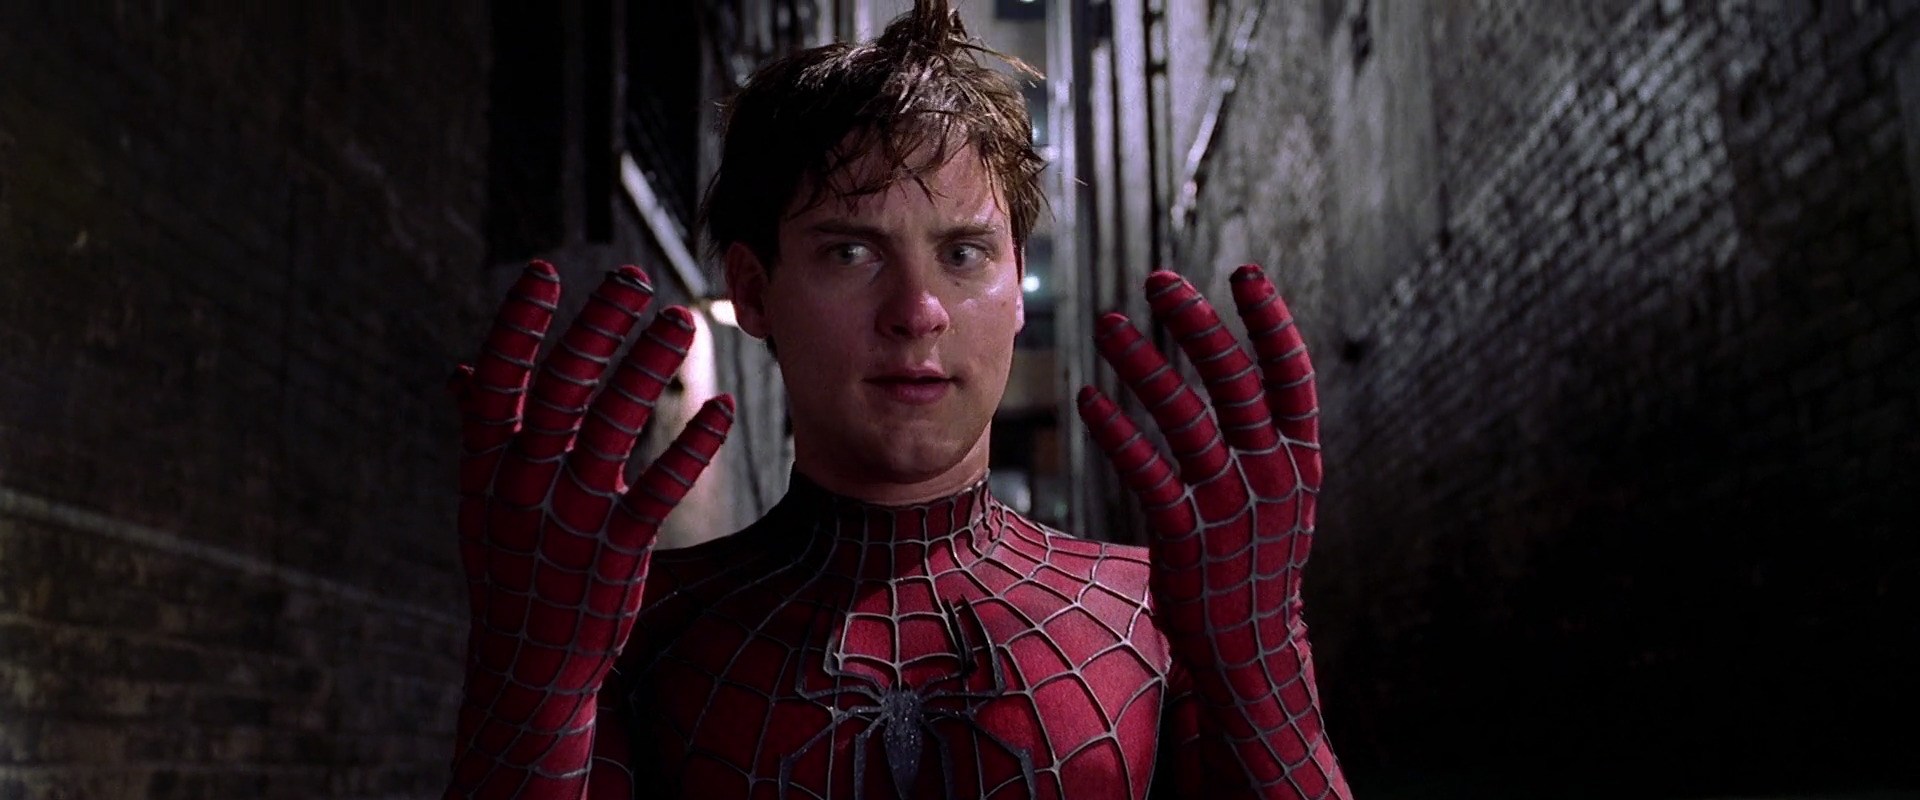 Spider-Man 2 (2004) Review | The Cool Kat's Reviews